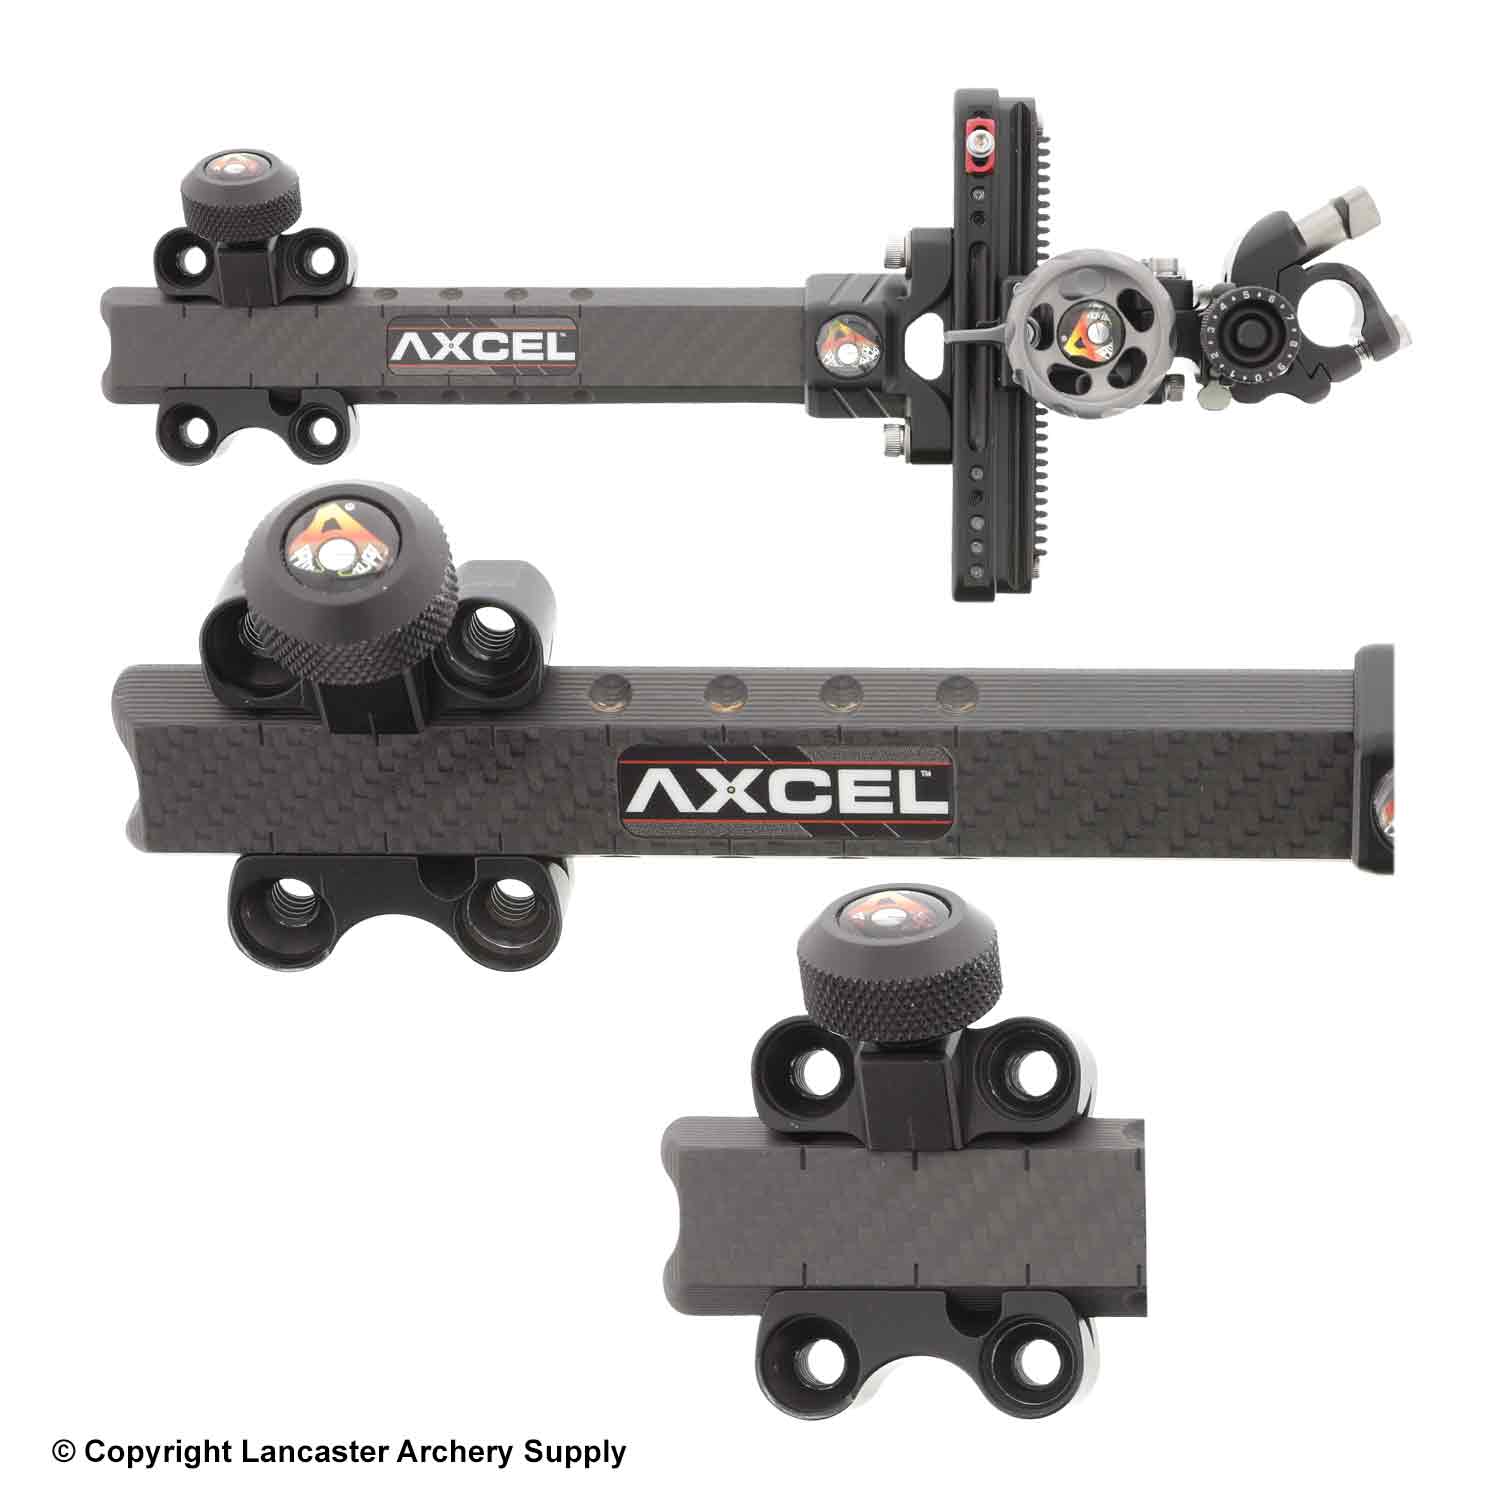 Axcel LANDSLYDE Carbon Pro Slider Sight (Without Scope)(Open Box X1035266)